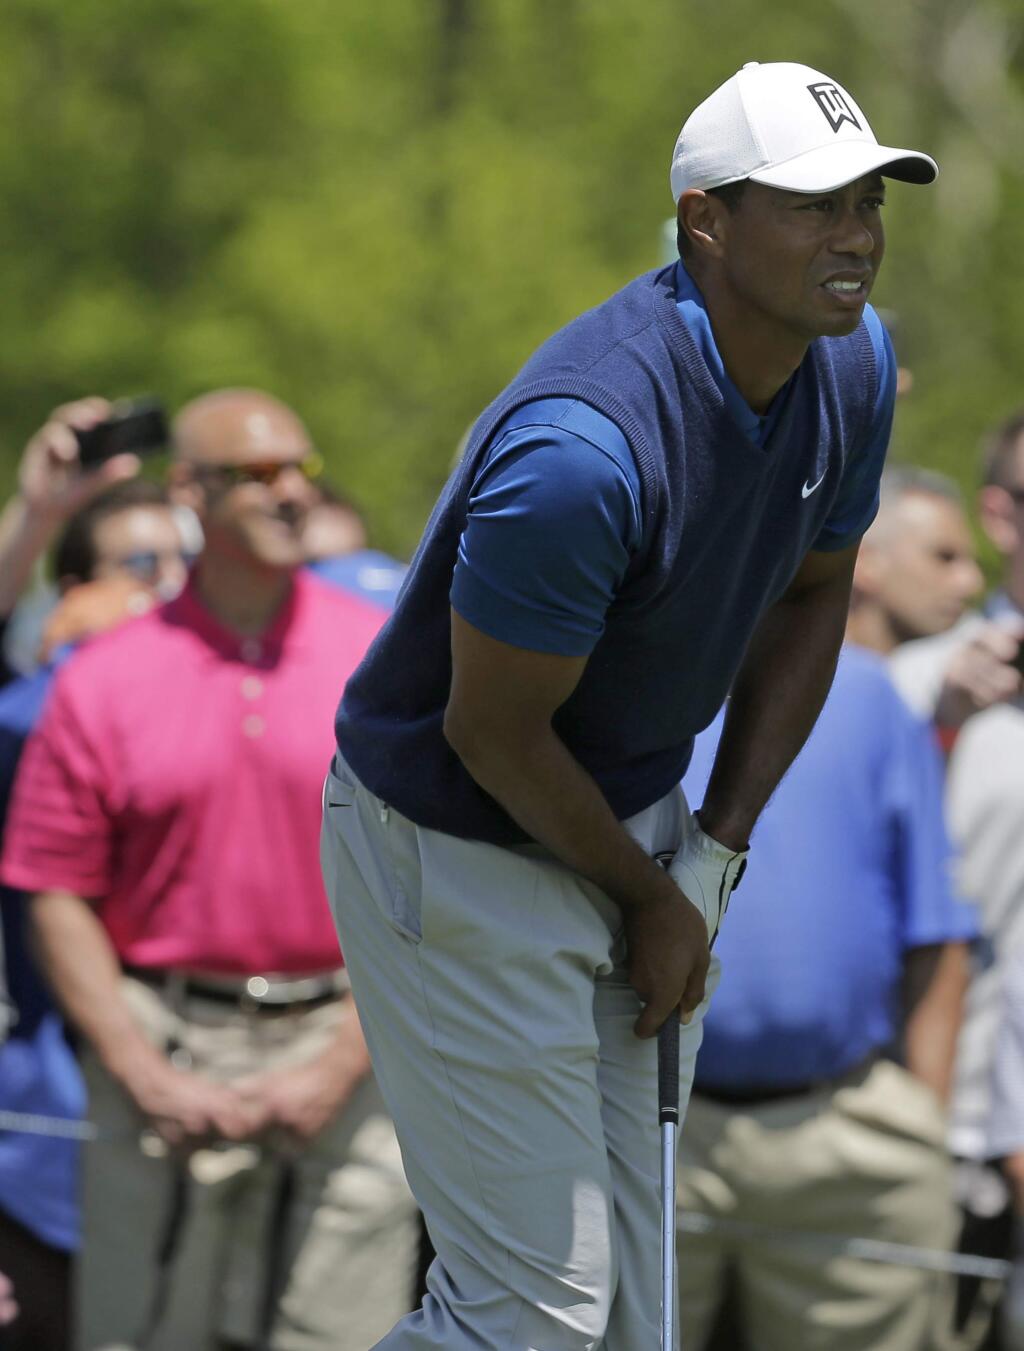 Tiger Woods watches his tee shot off the sixth hole during the first round of the PGA Championship, Thursday, May 16, 2019, at Bethpage Black in Farmingdale, N.Y. (AP Photo/Seth Wenig)